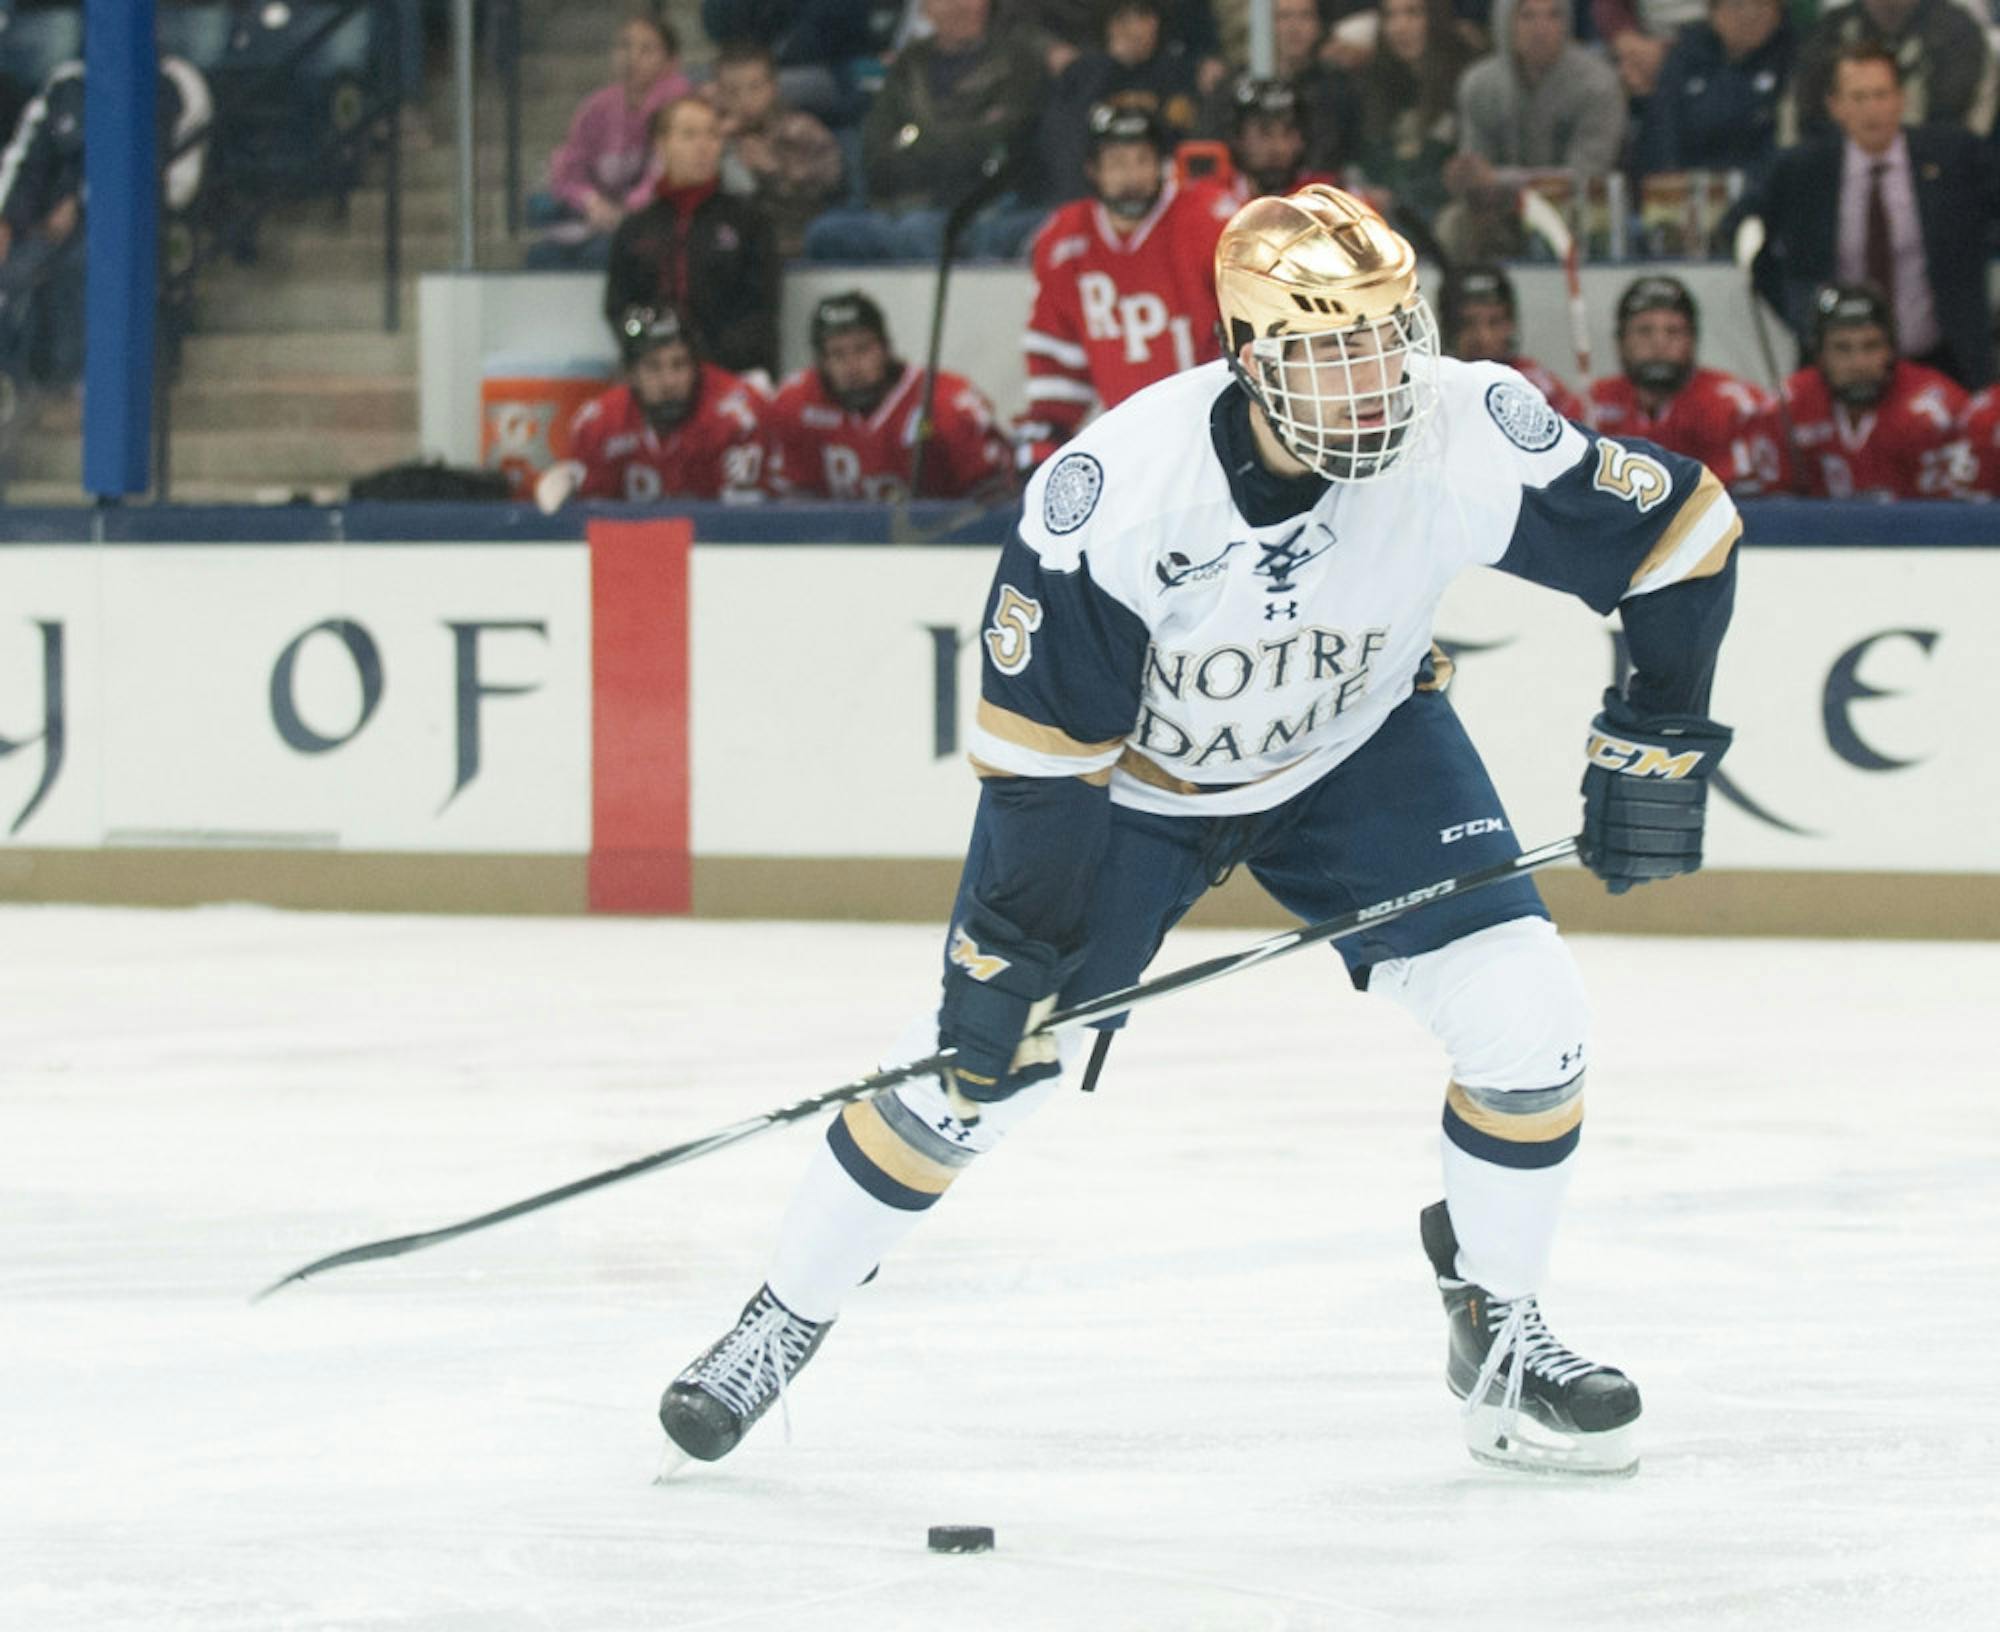 Irish senior defenseman Robbie Russo controls the puck during Notre Dame’s 3-2 loss to Rensselaer on Oct. 10.